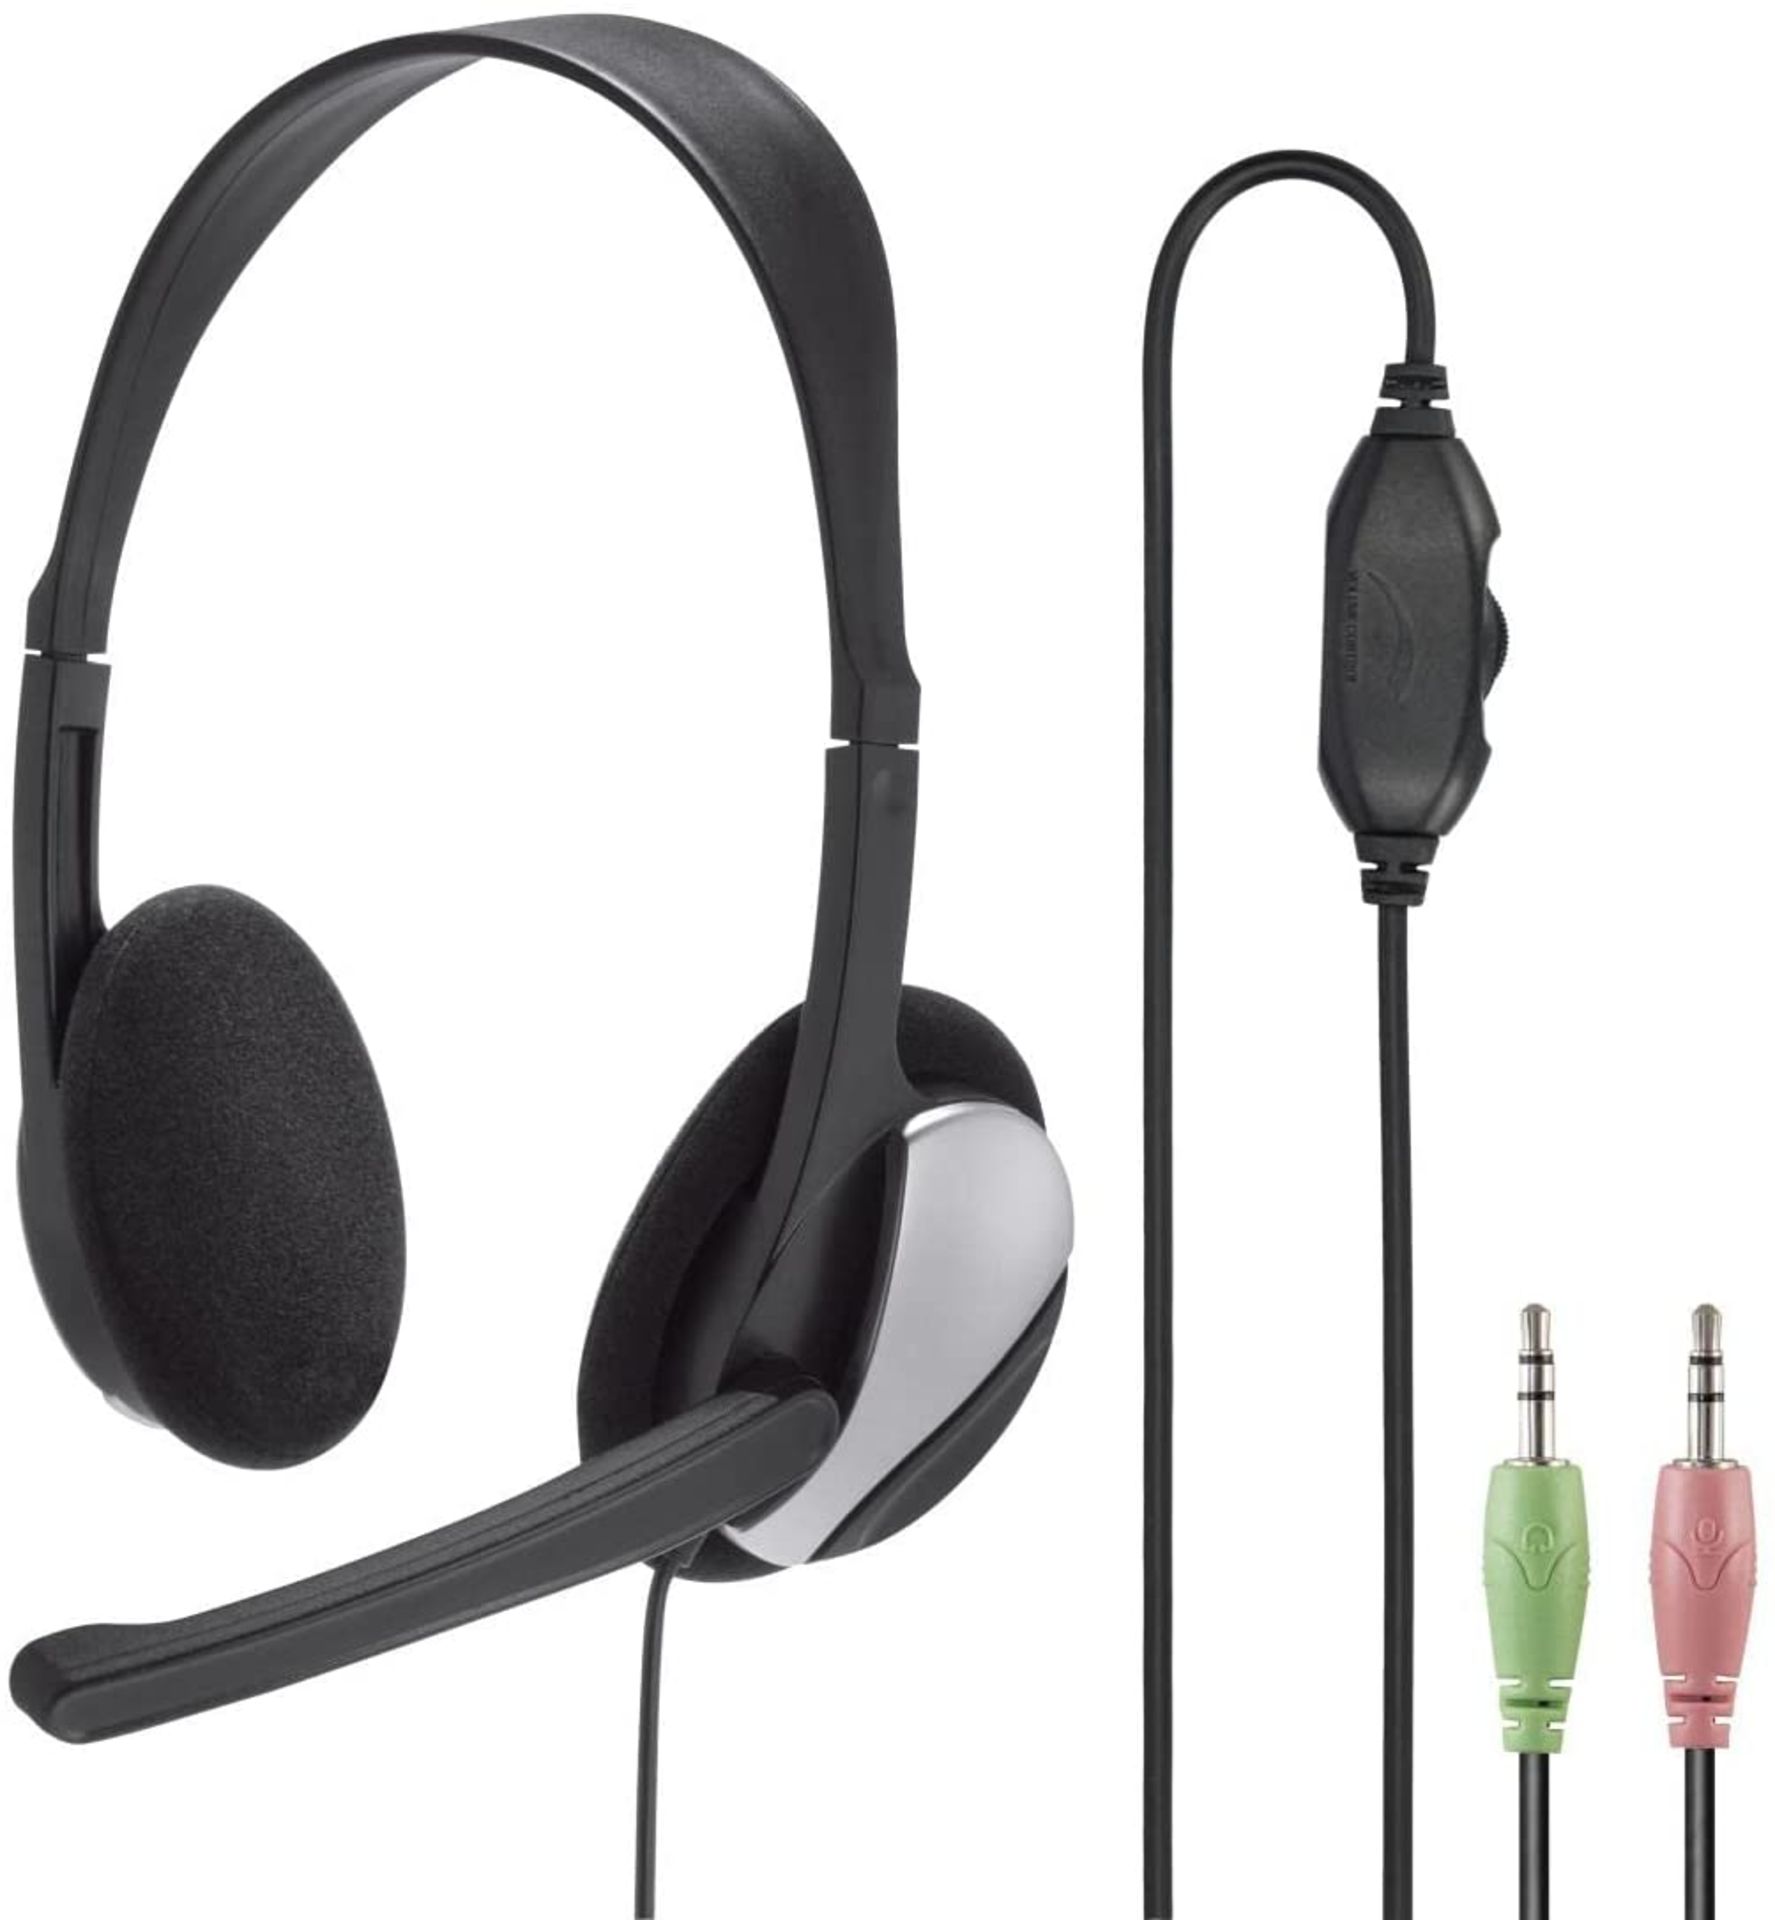 HAMA PC OFFICE HEADSET HS-P100 RRP £10 Condition ReportAppraisal Available on Request - All Items